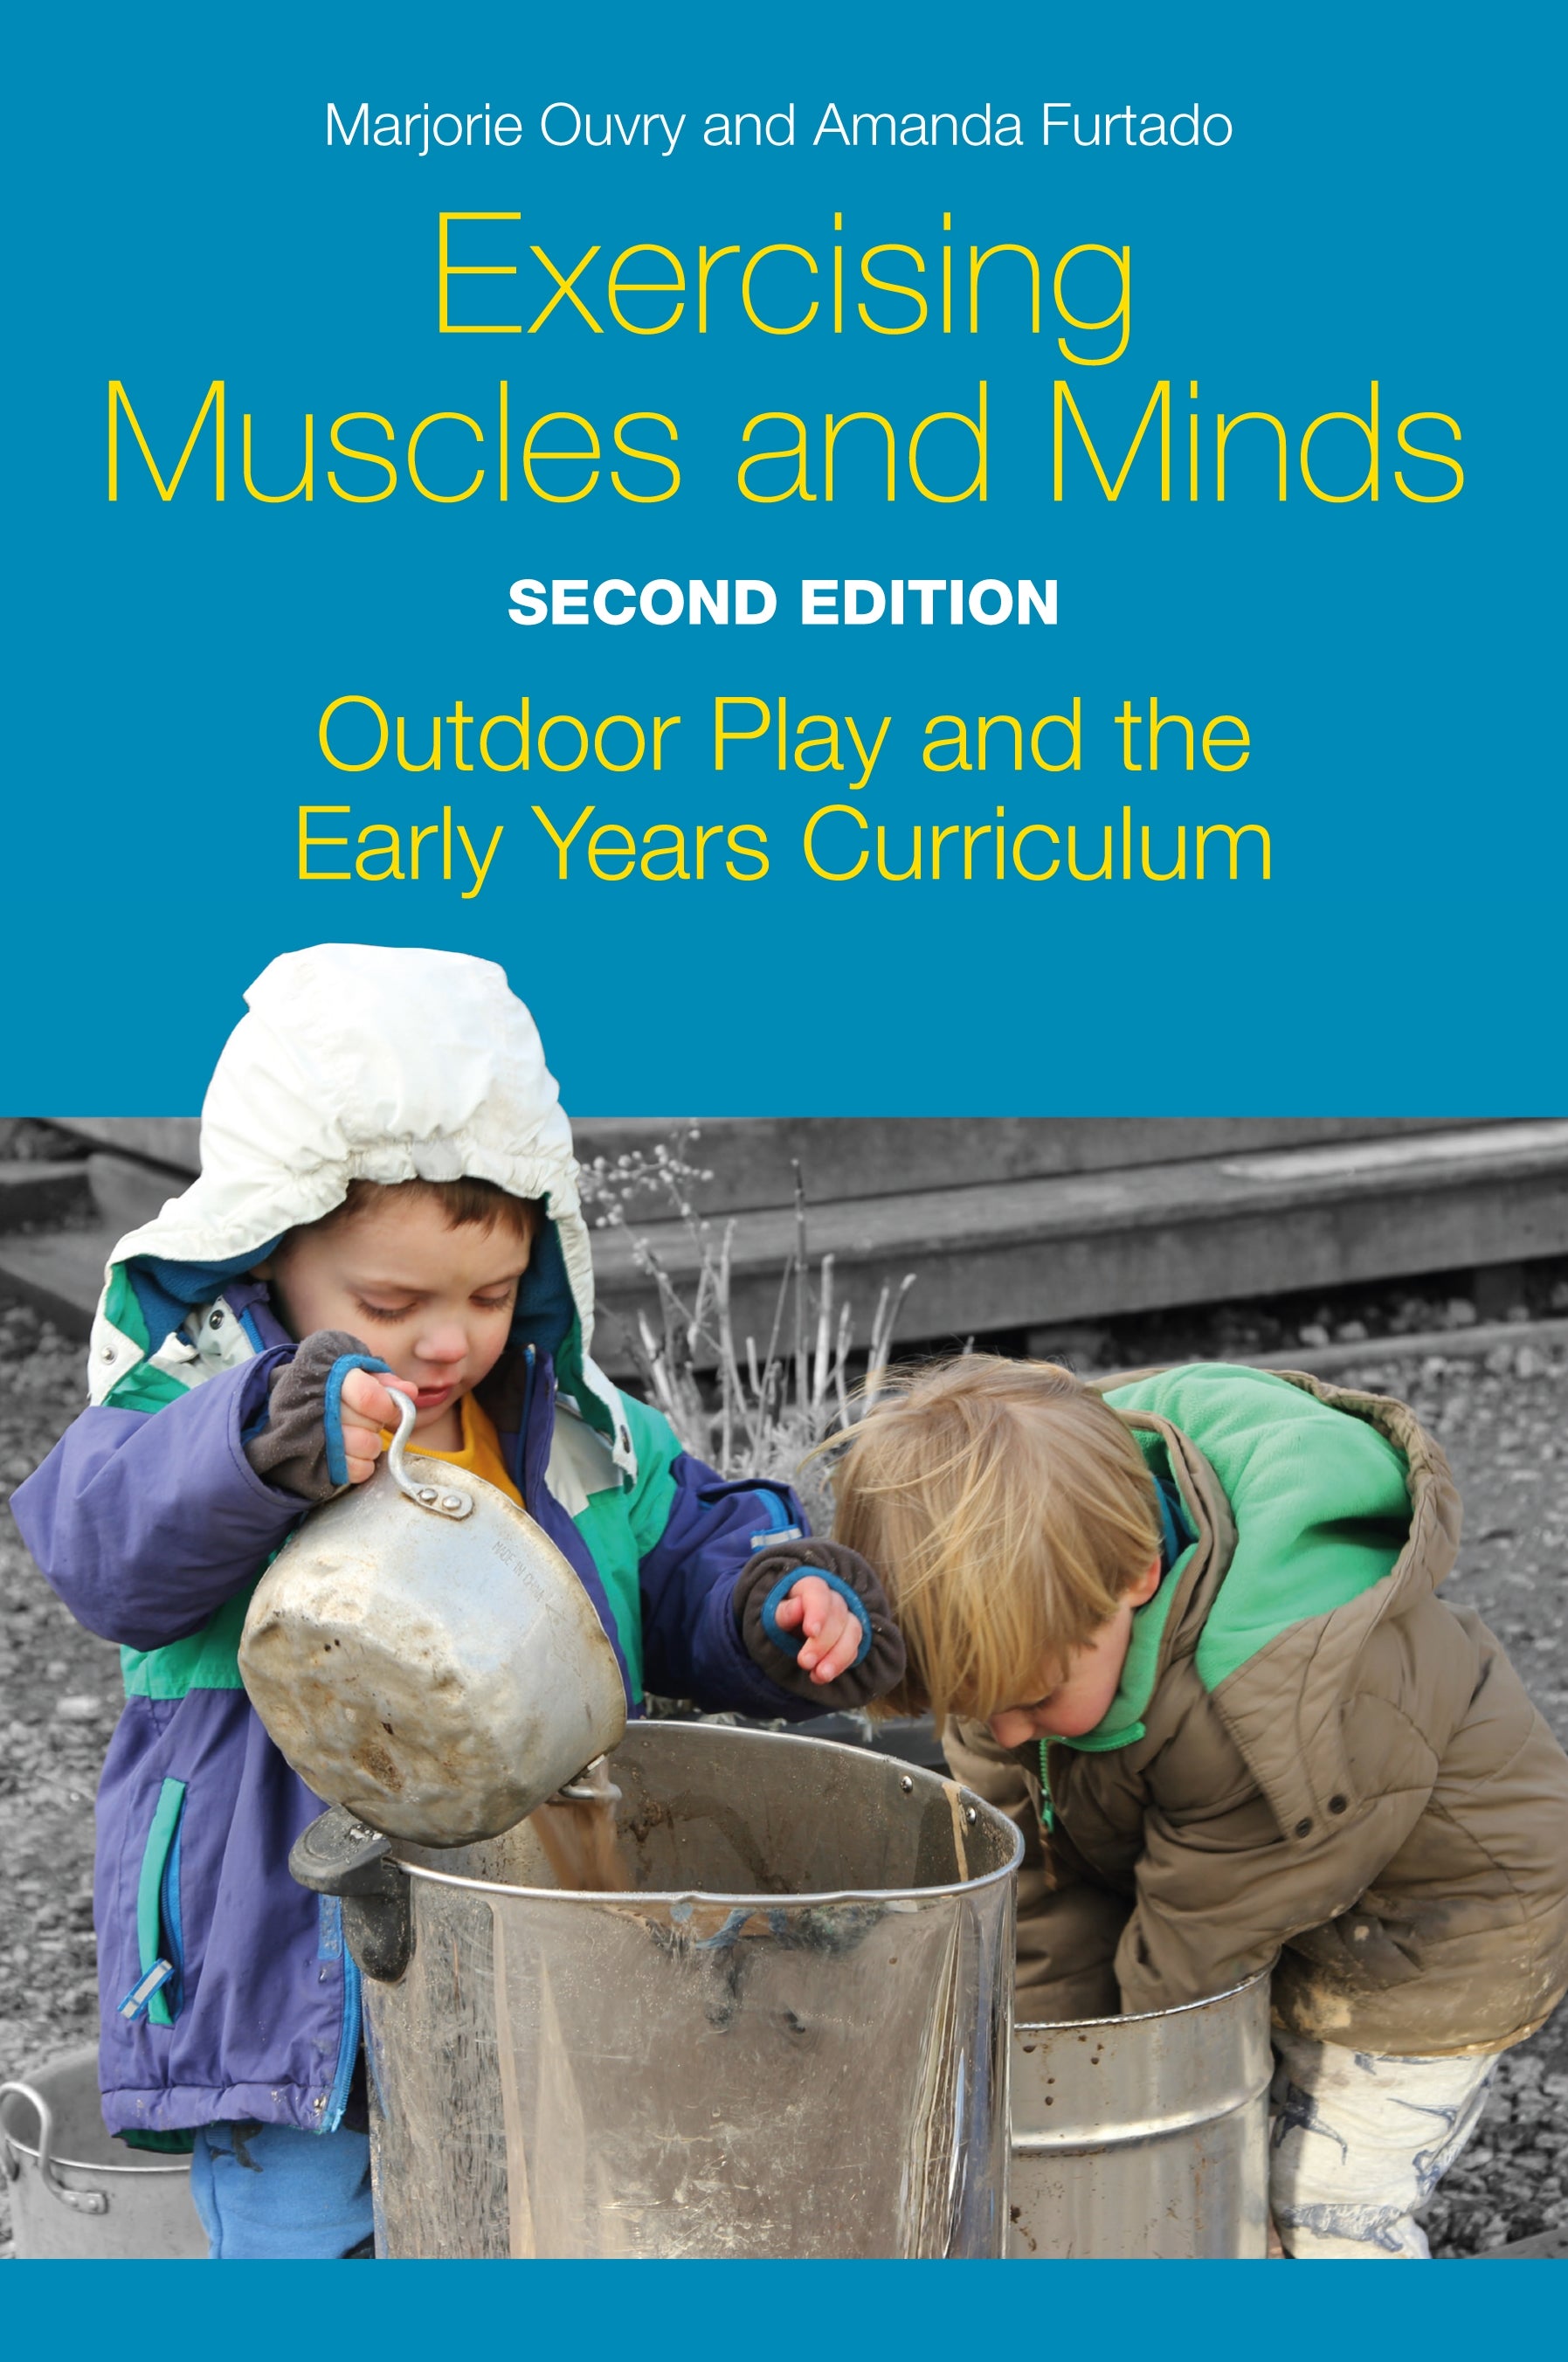 Exercising Muscles and Minds, Second Edition by Marjorie Ouvry, Amanda Furtado